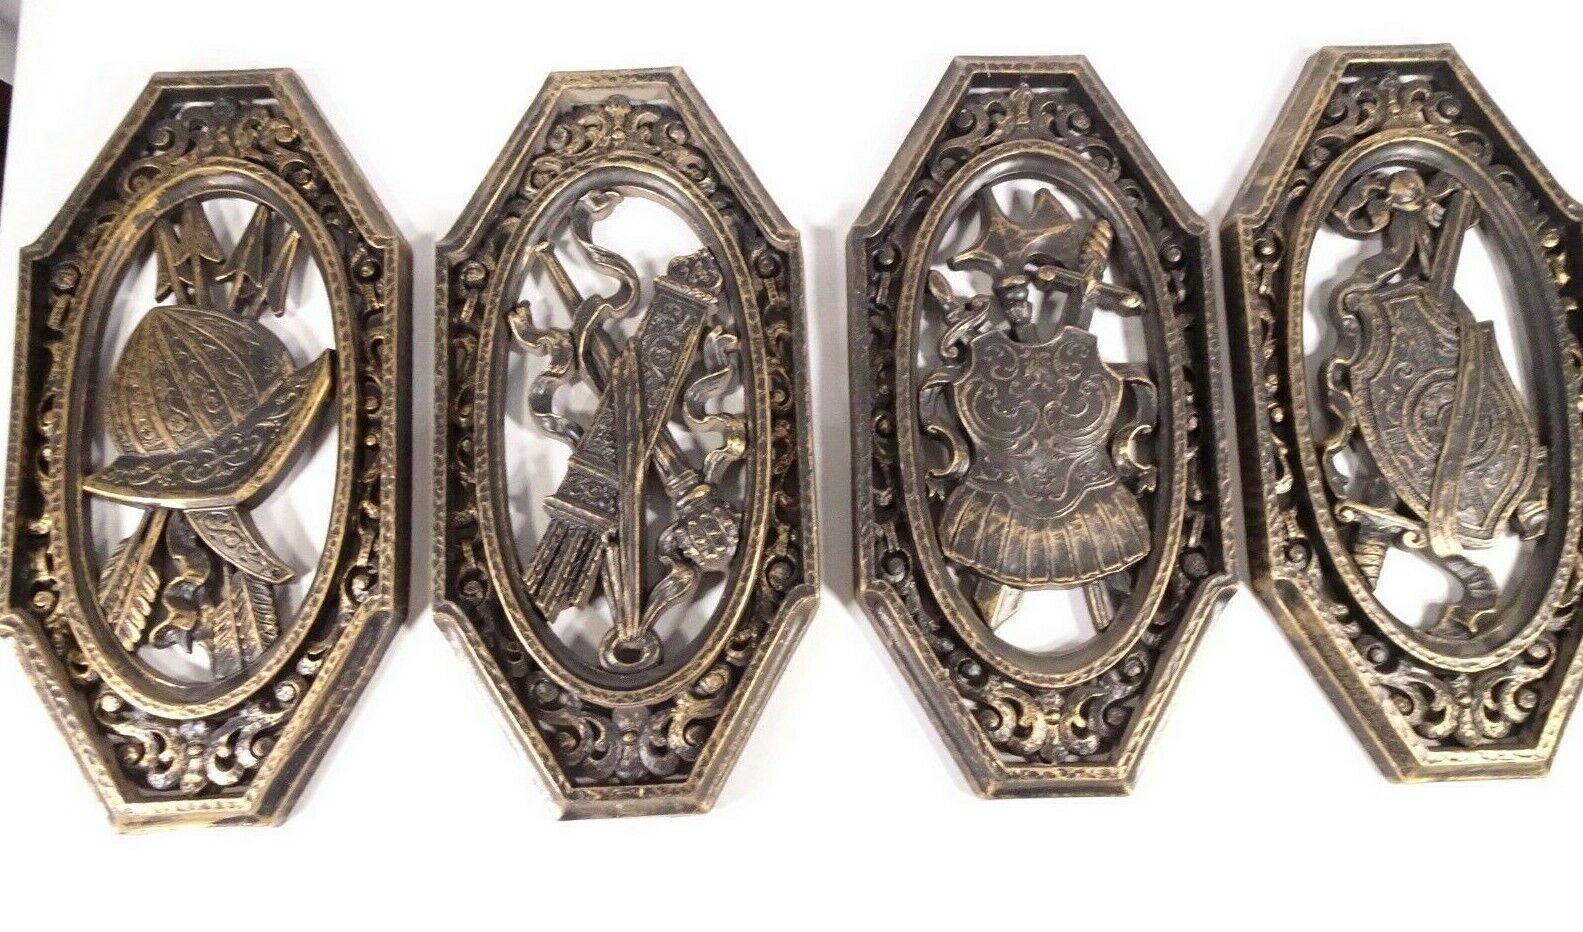 Set of 4 Vintage Homco Medieval Armor Spanish Weapons Coat of Arms Wall Plaques